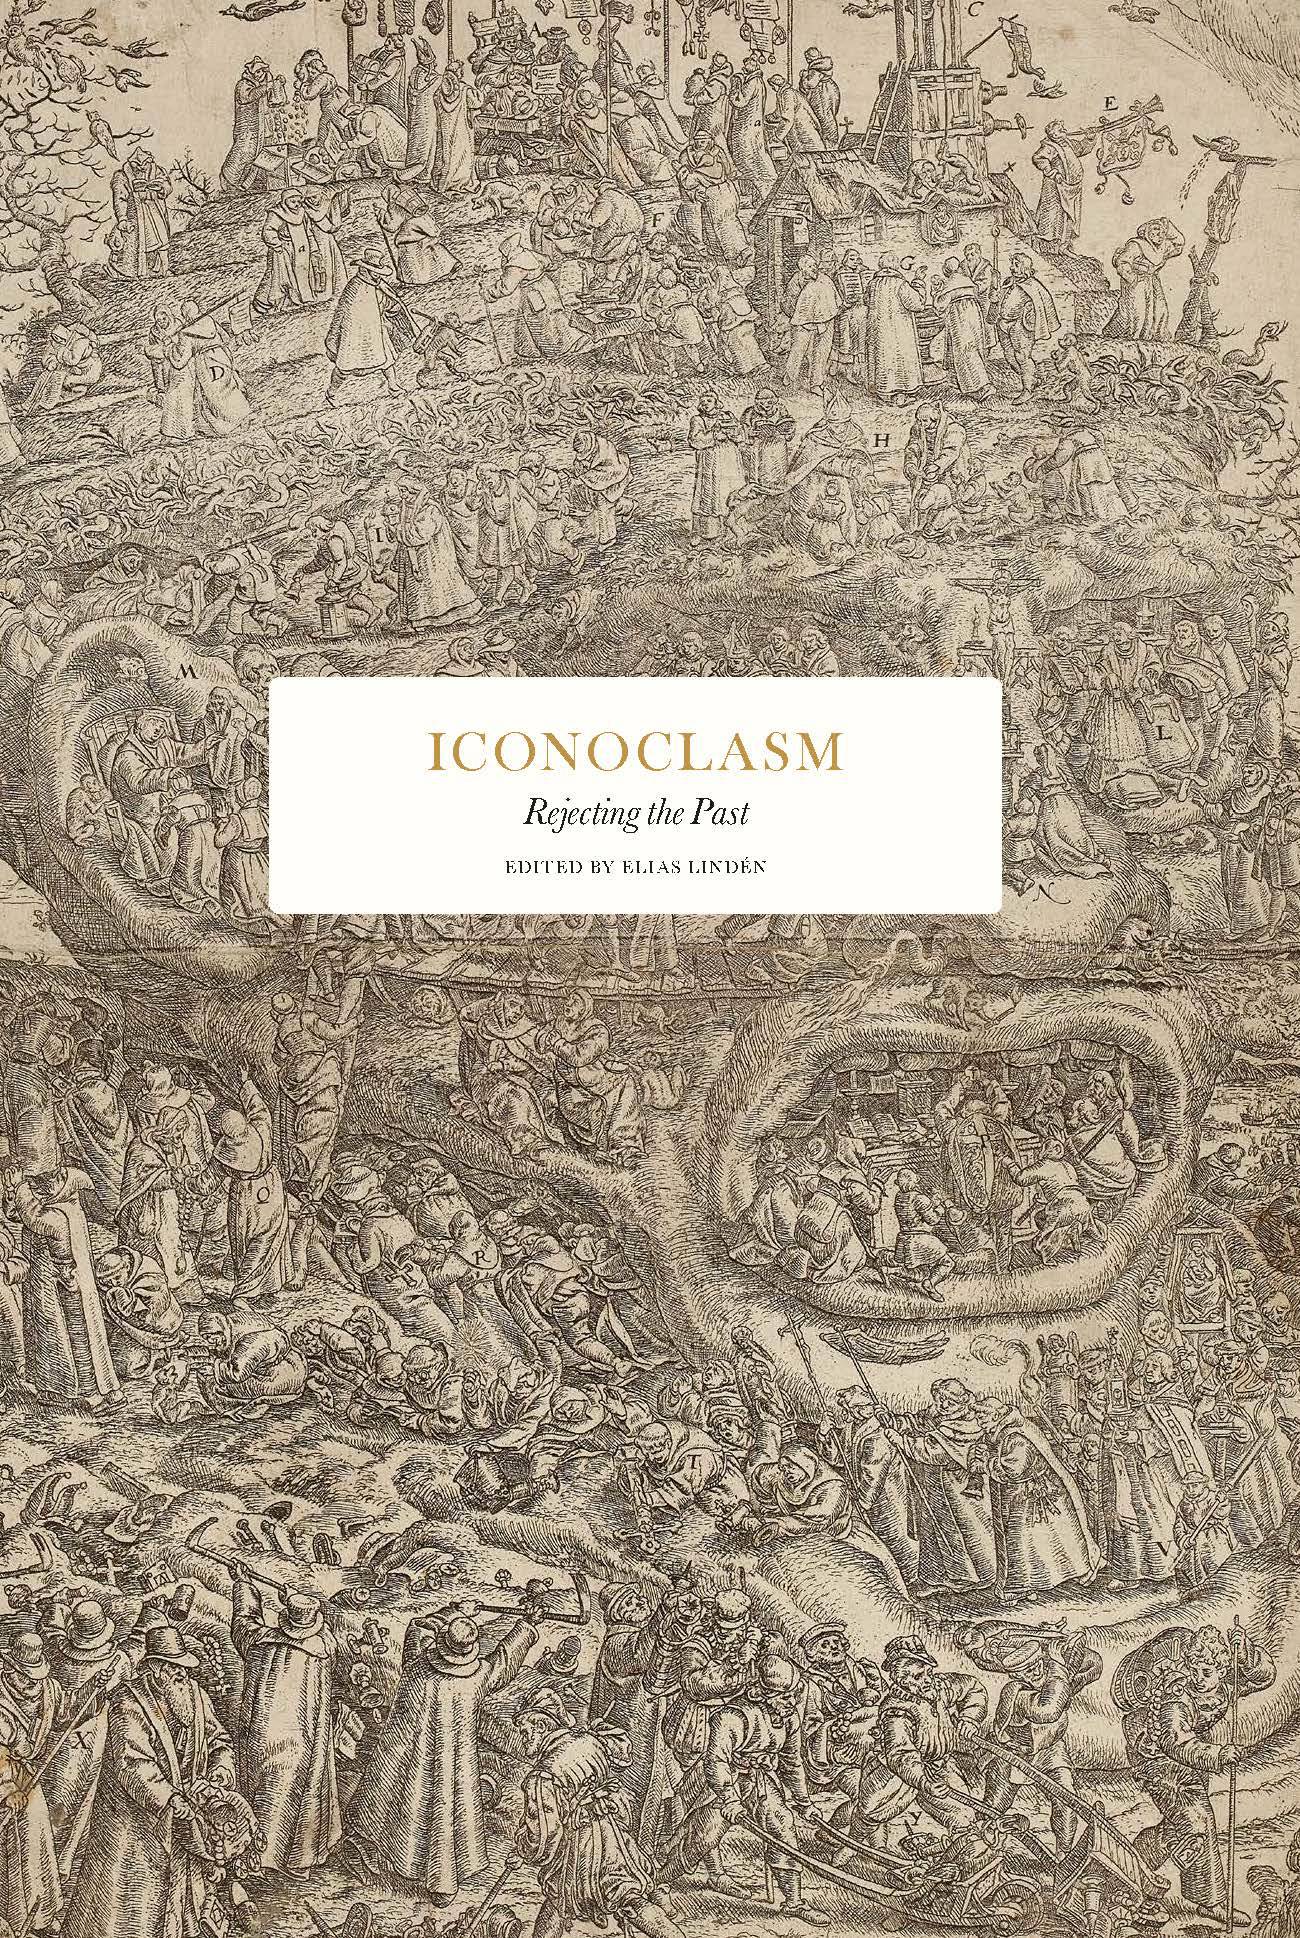 Iconoclasm: rejecting the past